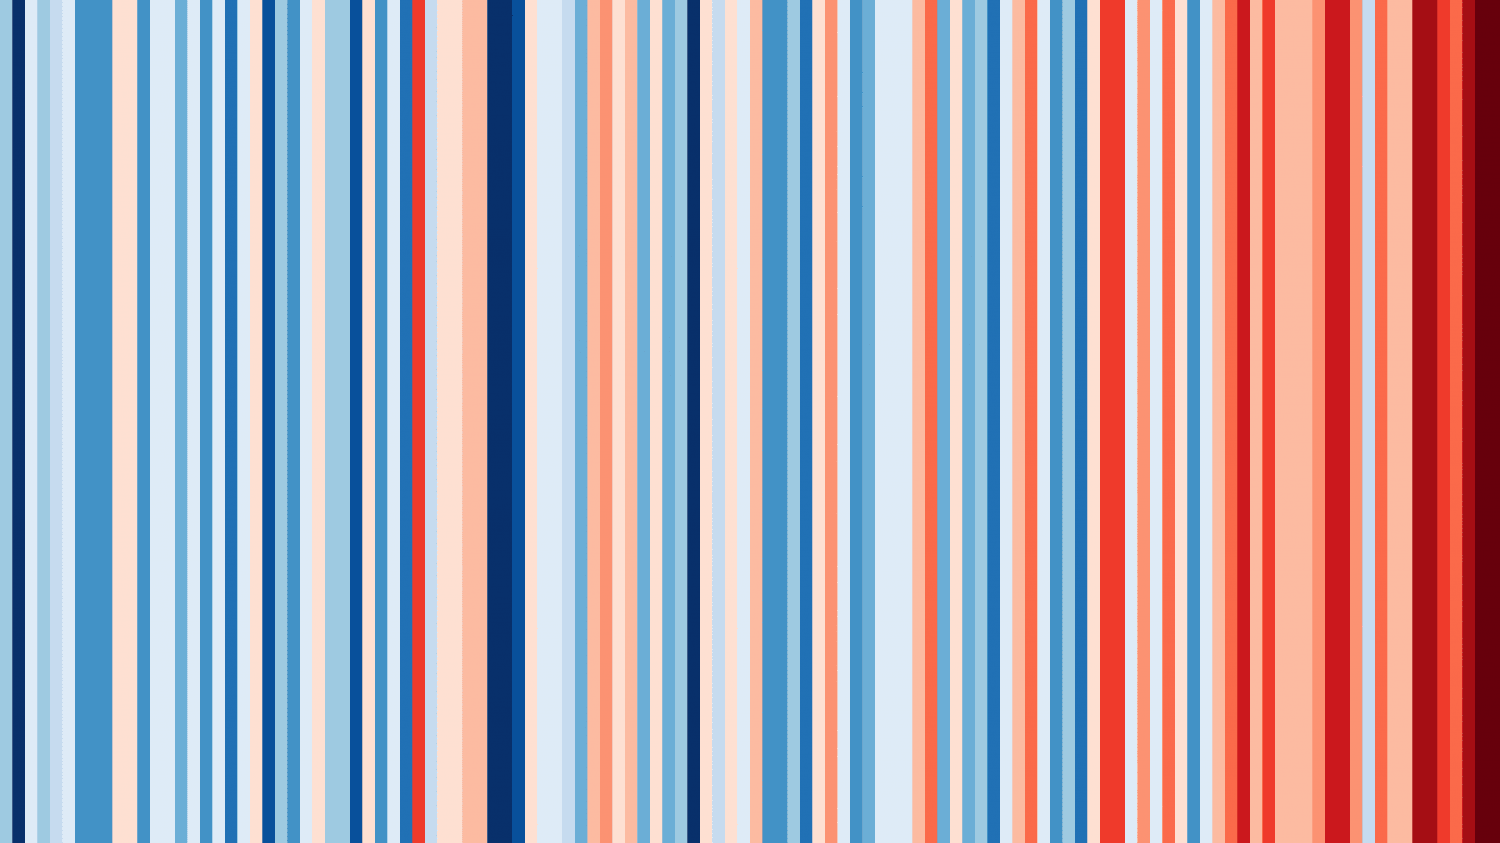 Ed Hawkins – „Warming Stripes for Poland from 1901-2020